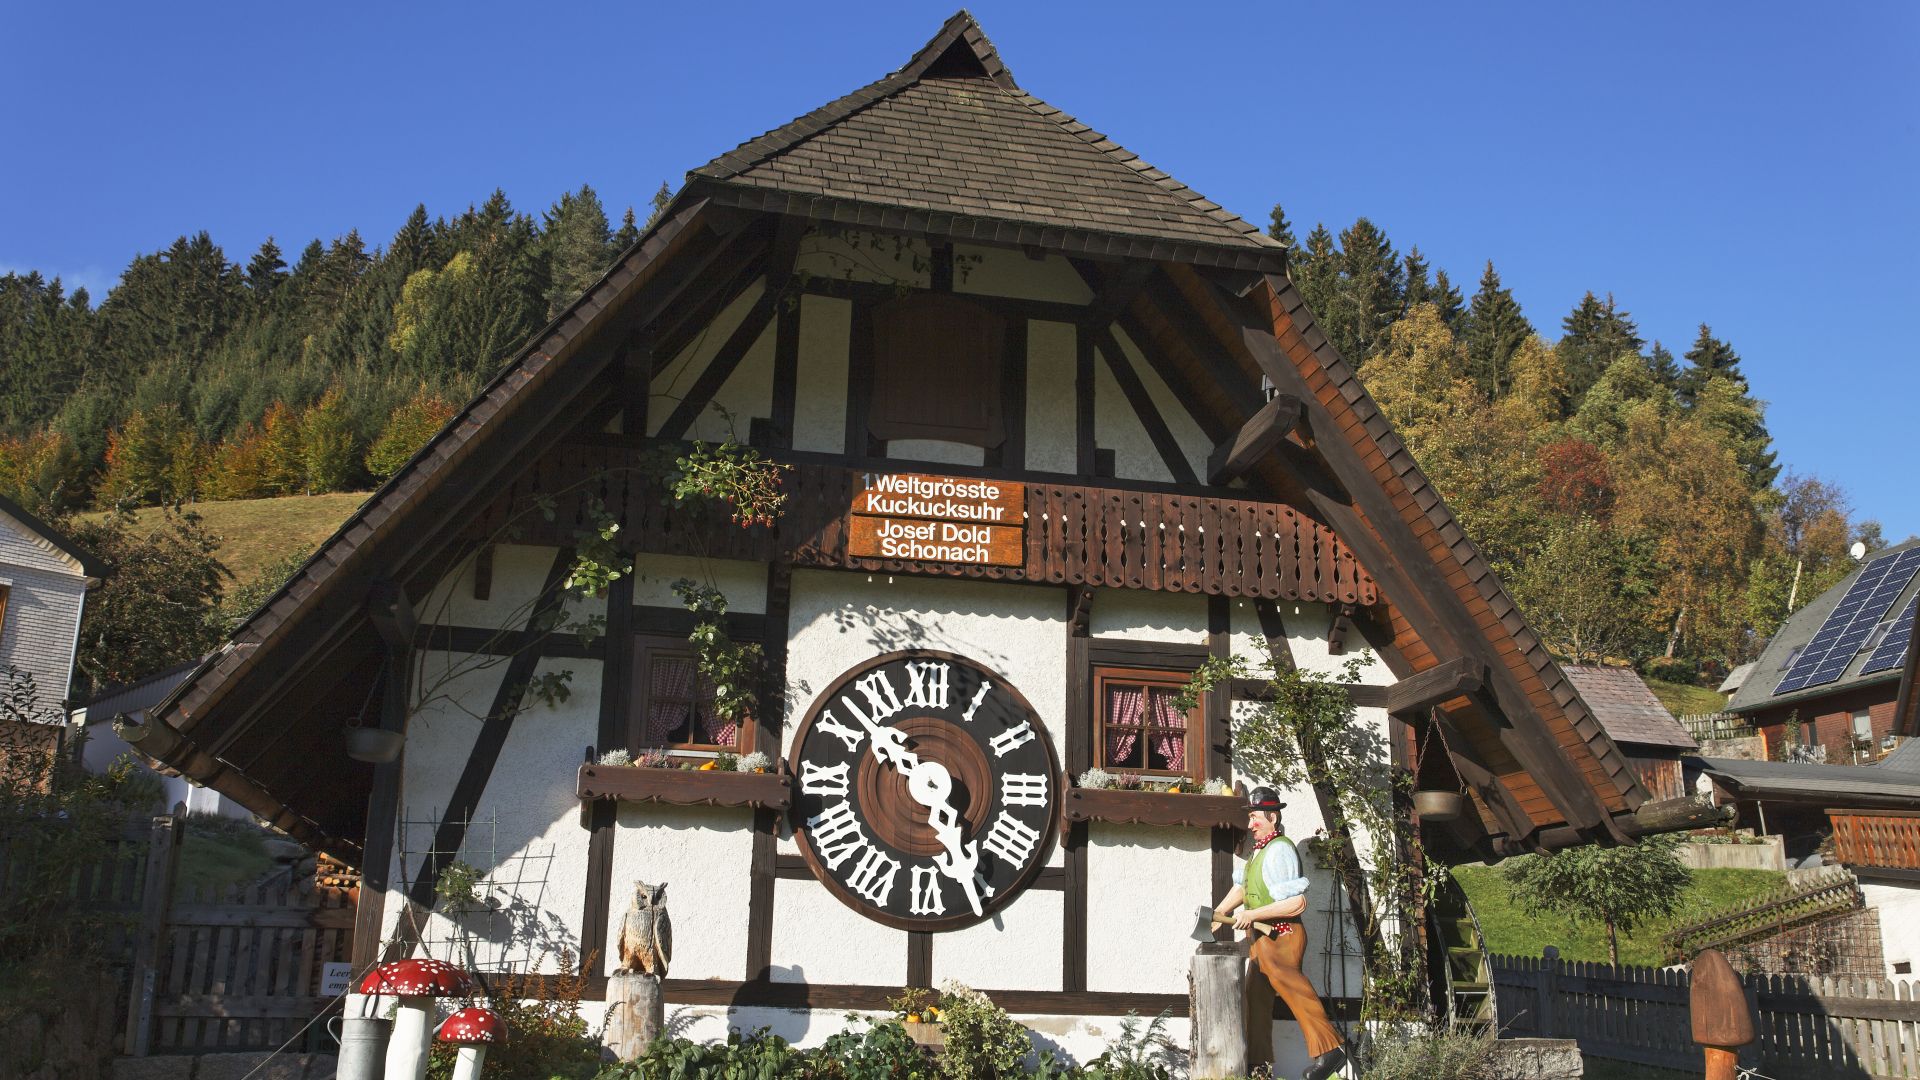 Schonach/Black Forest: The largest cuckoo clock in the world